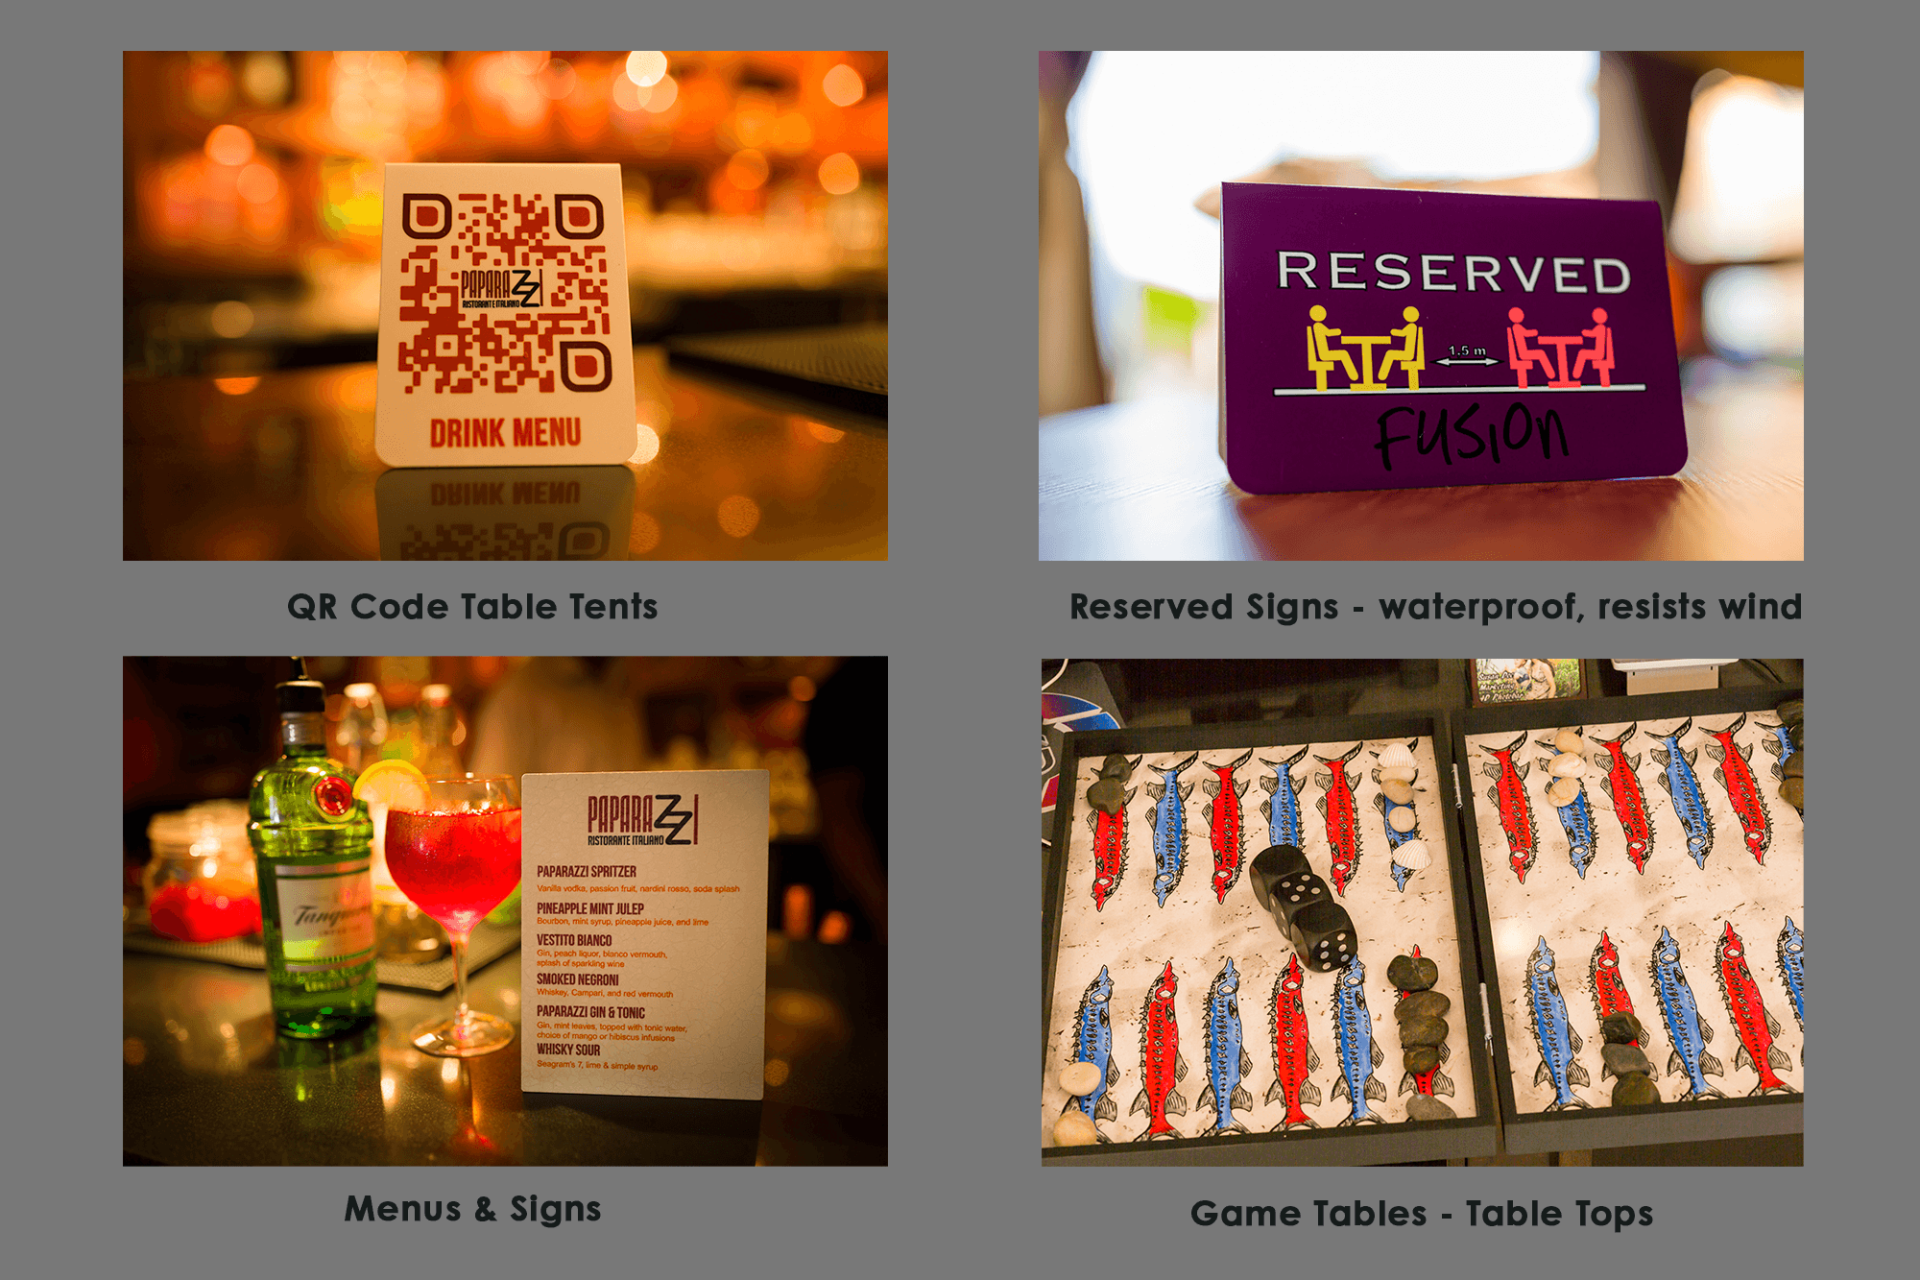 Menus, Signs, Game tables, qr code table tents, reserved signs